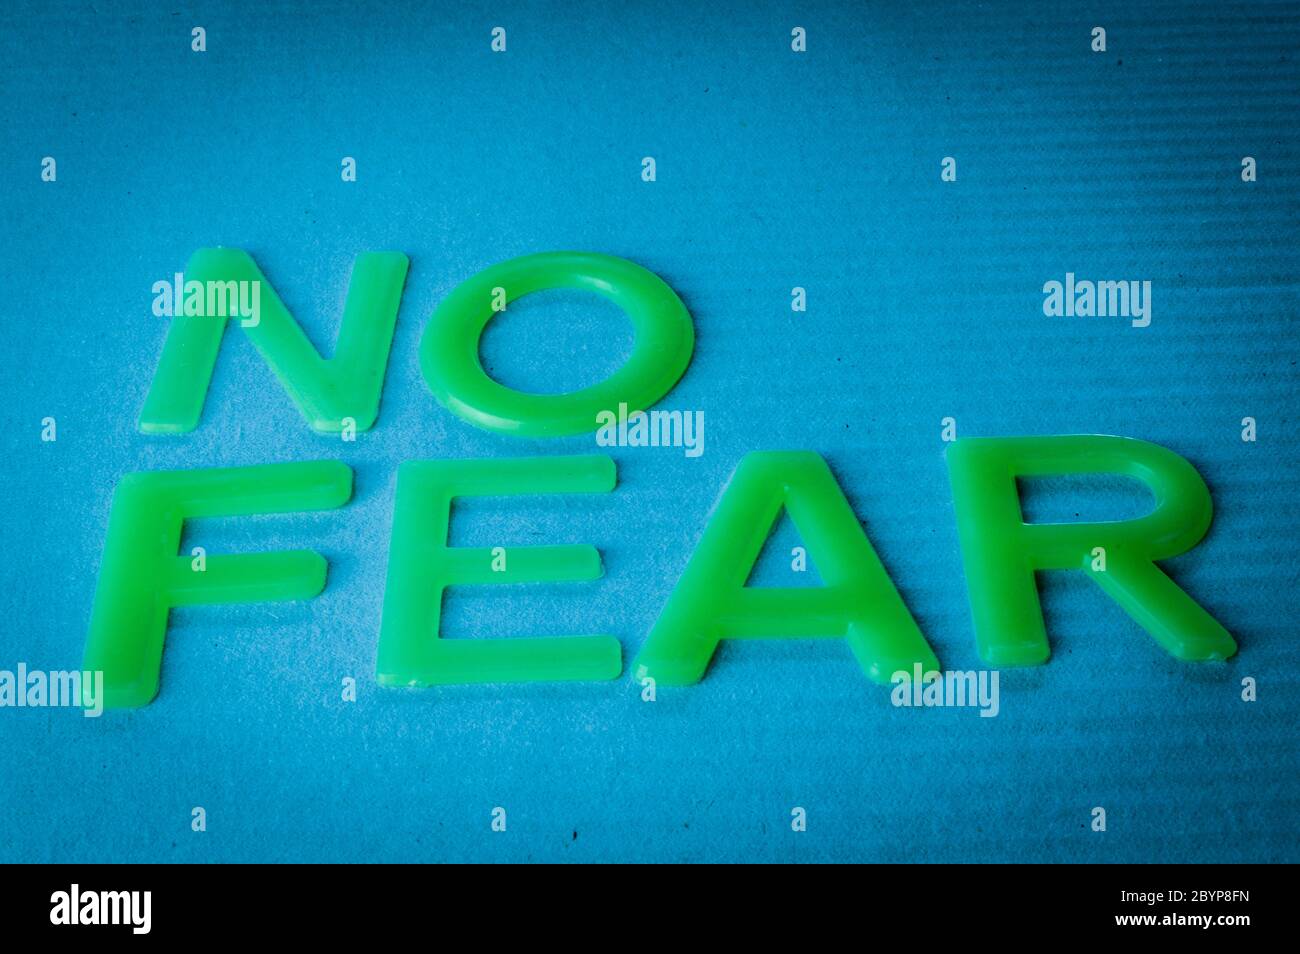 No Fear Motivation Concept - Words made by green letters on blue background. Stock Photo